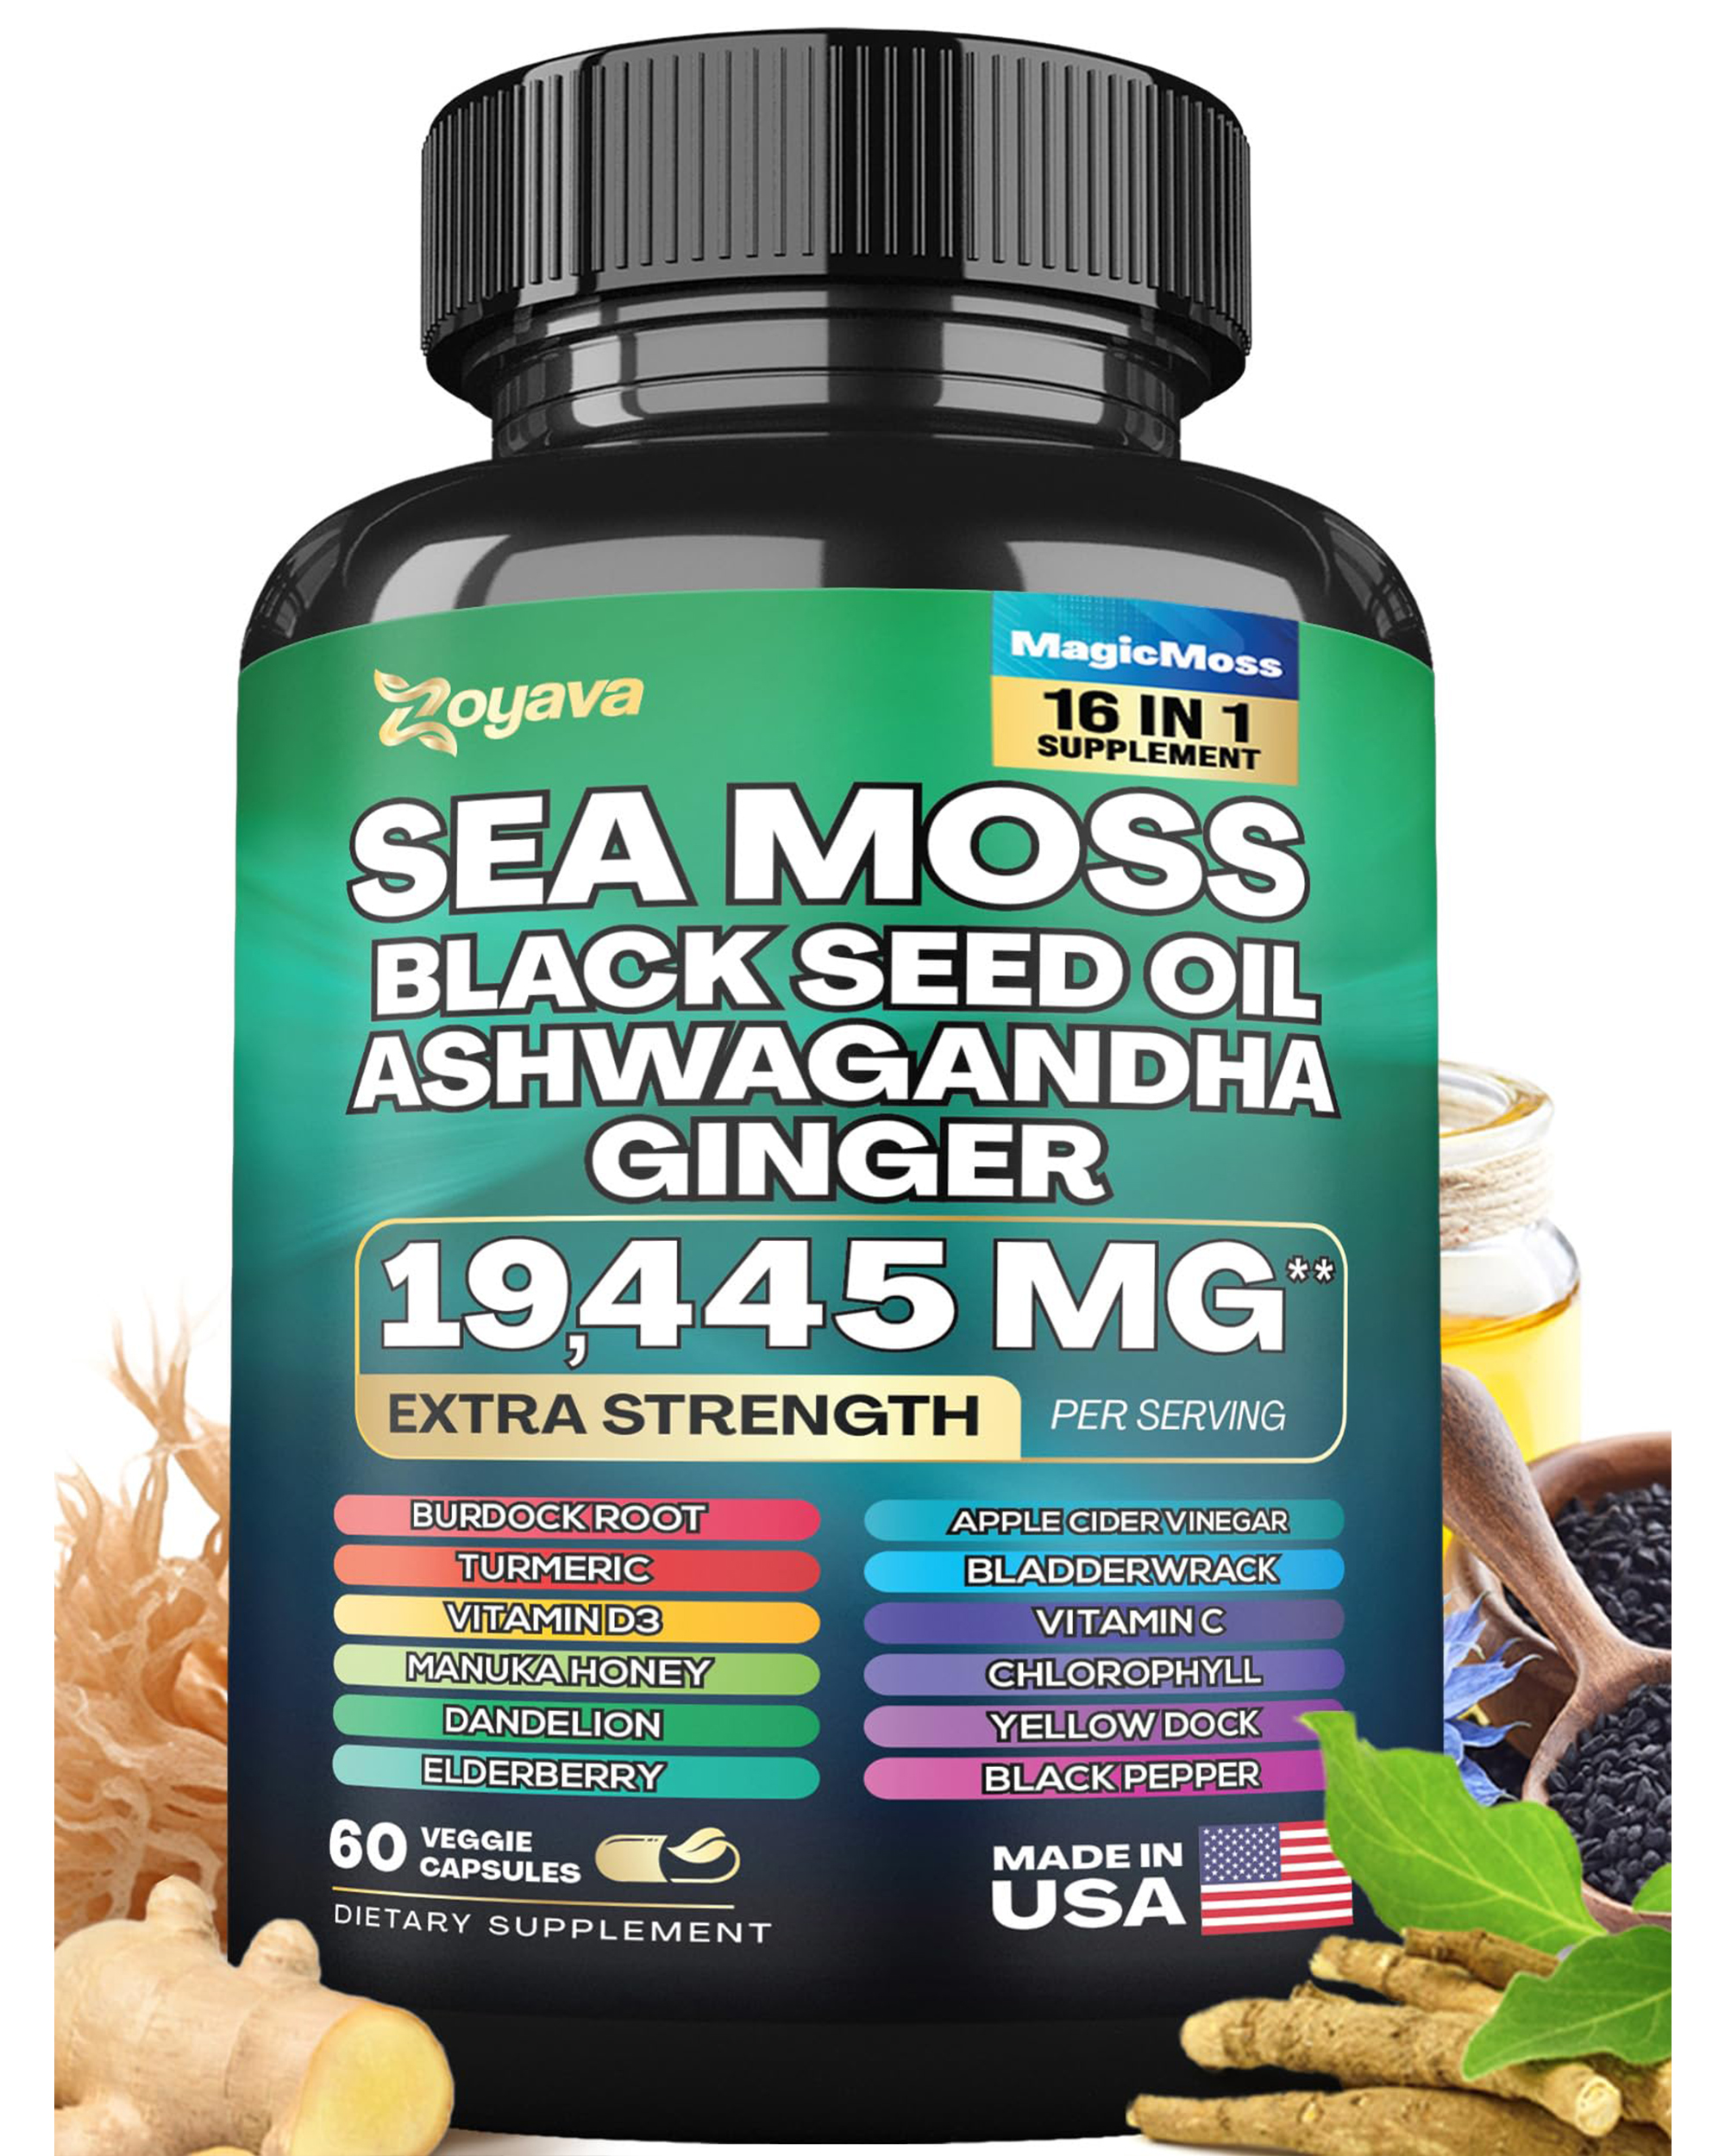 🎁[Free Shipping]Revitalize Inside Out: Sea Moss 16-in-1 Magic Moss & Cosmic Collagen Power Duo